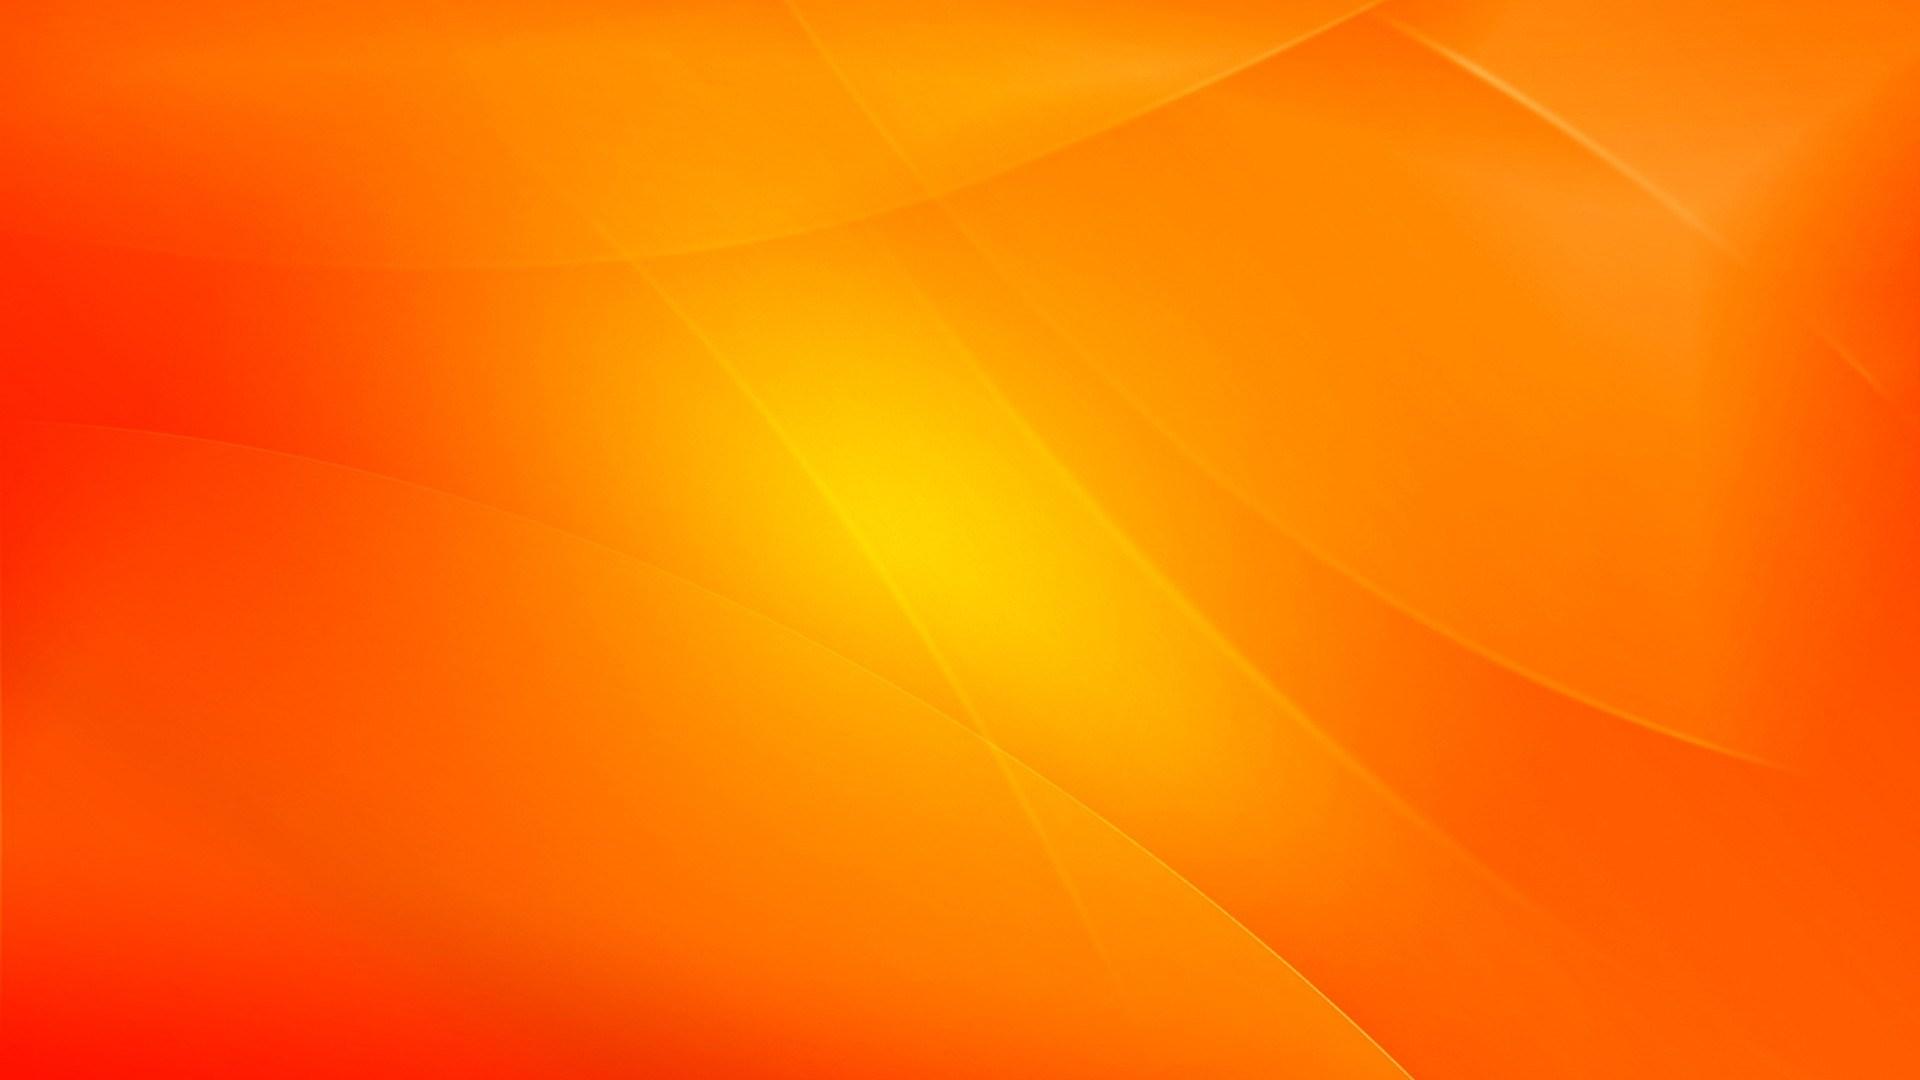 Abstract Wallpaper HD Orange Orange Abstract Background